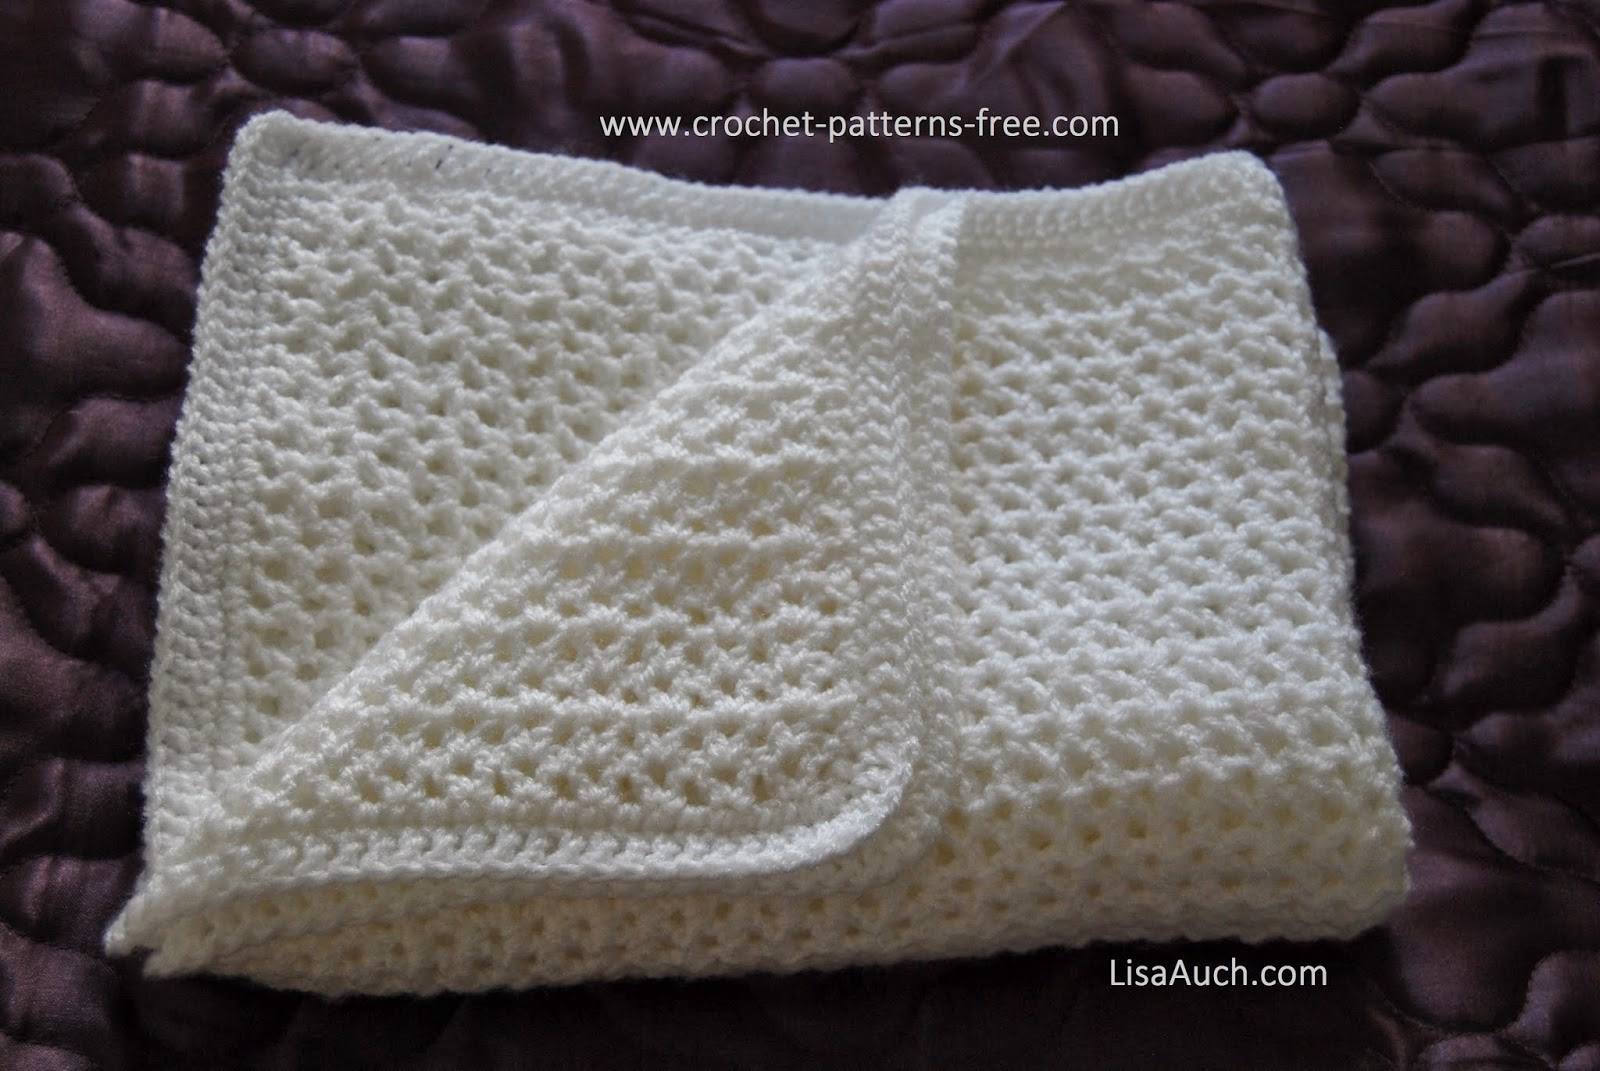 Crochet Baby Blanket Free Pattern Free Crochet Patterns And Designs Lisaauch Free Crochet Ba